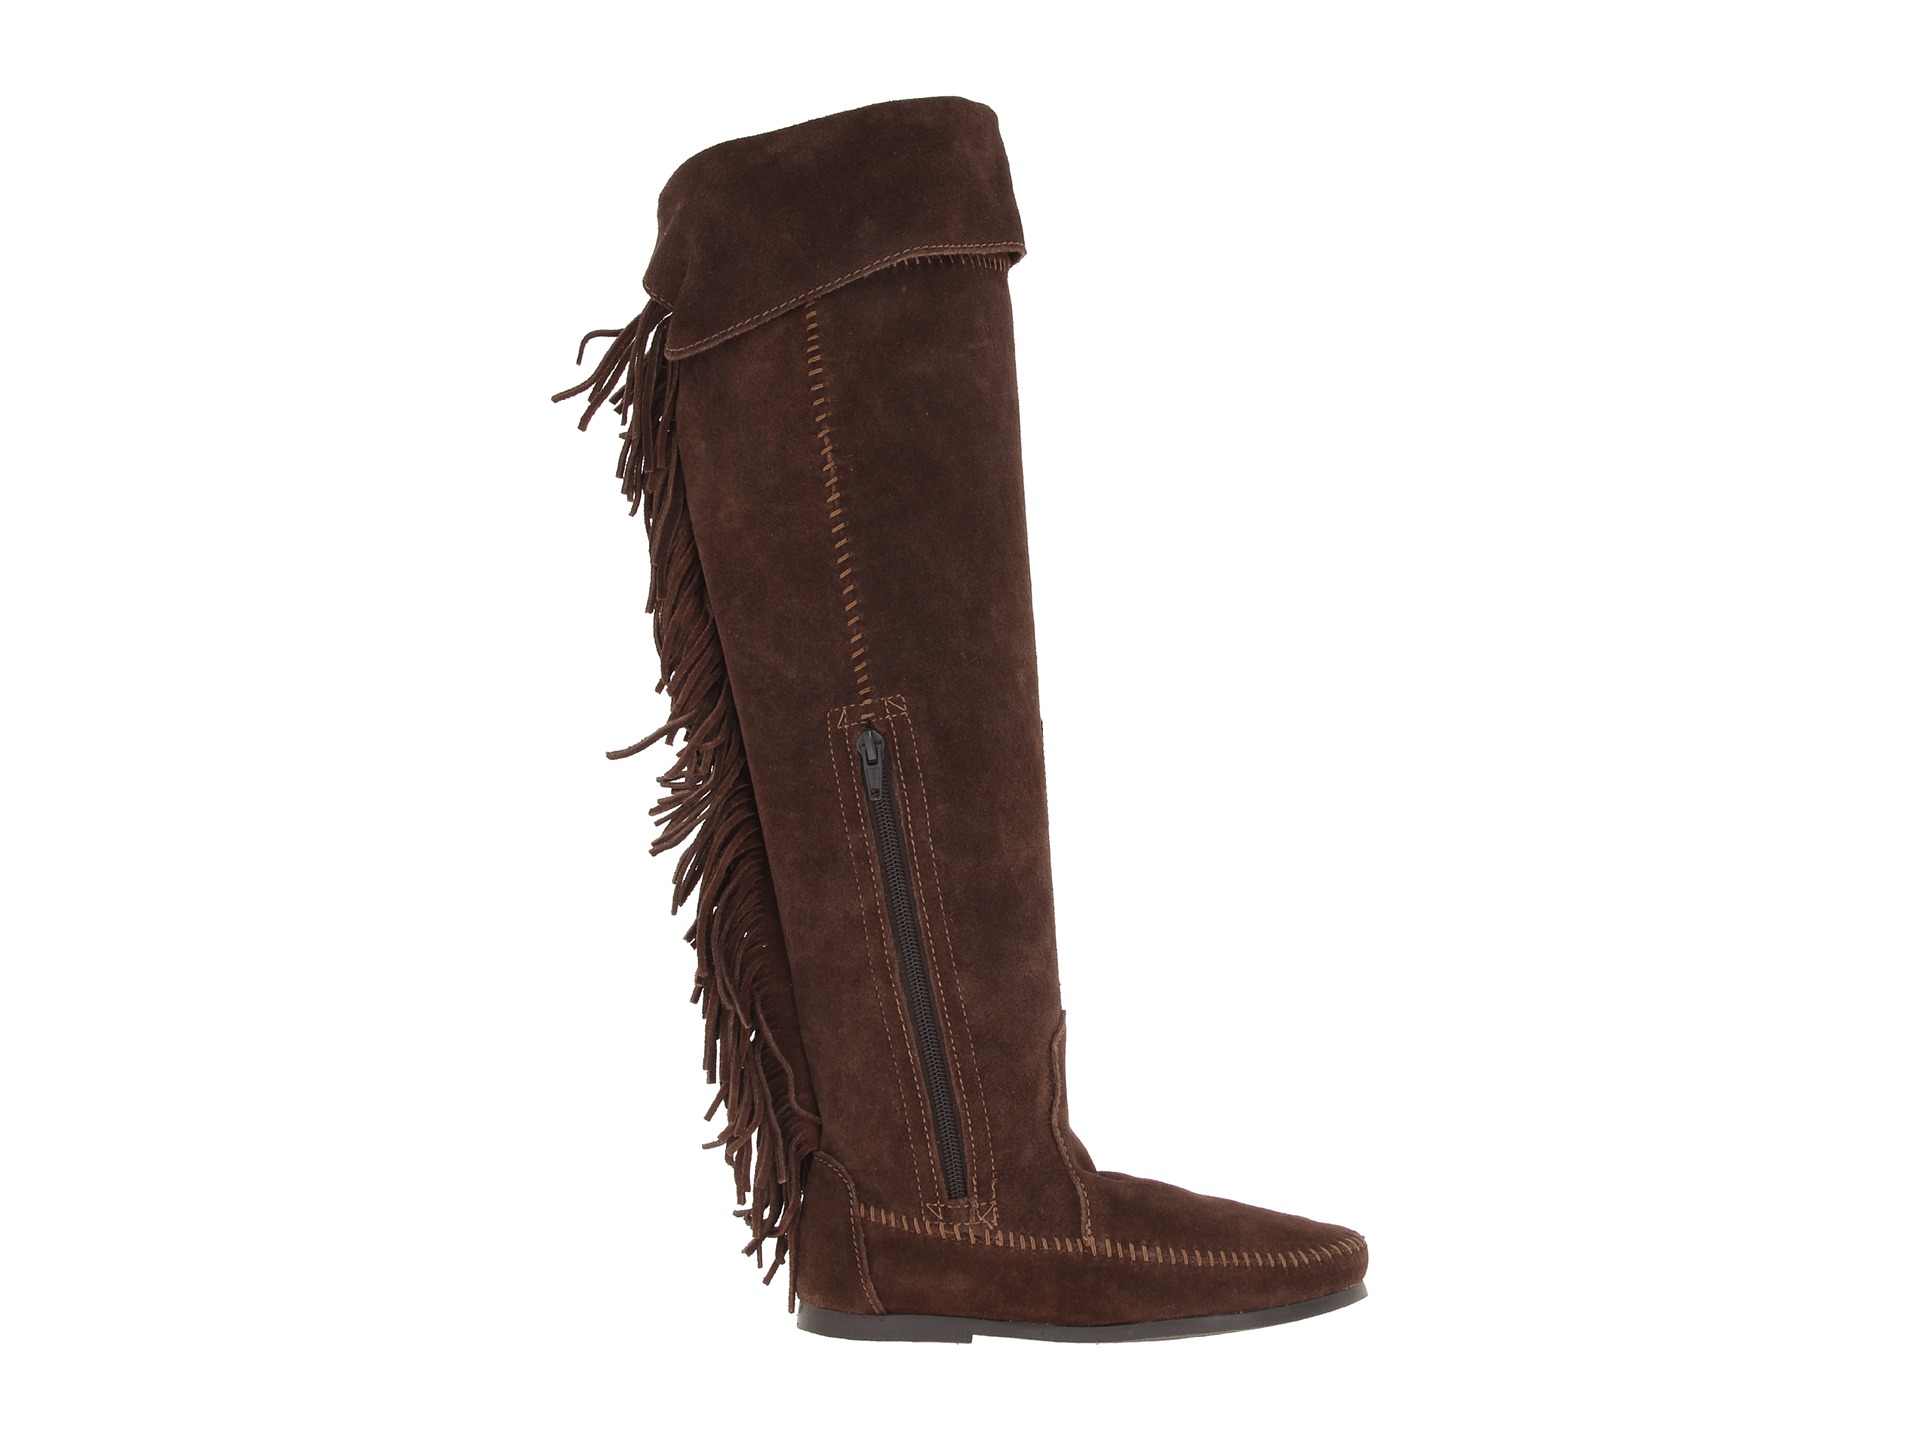 Minnetonka Over The Knee Fringe Boot | Shipped Free at Zappos